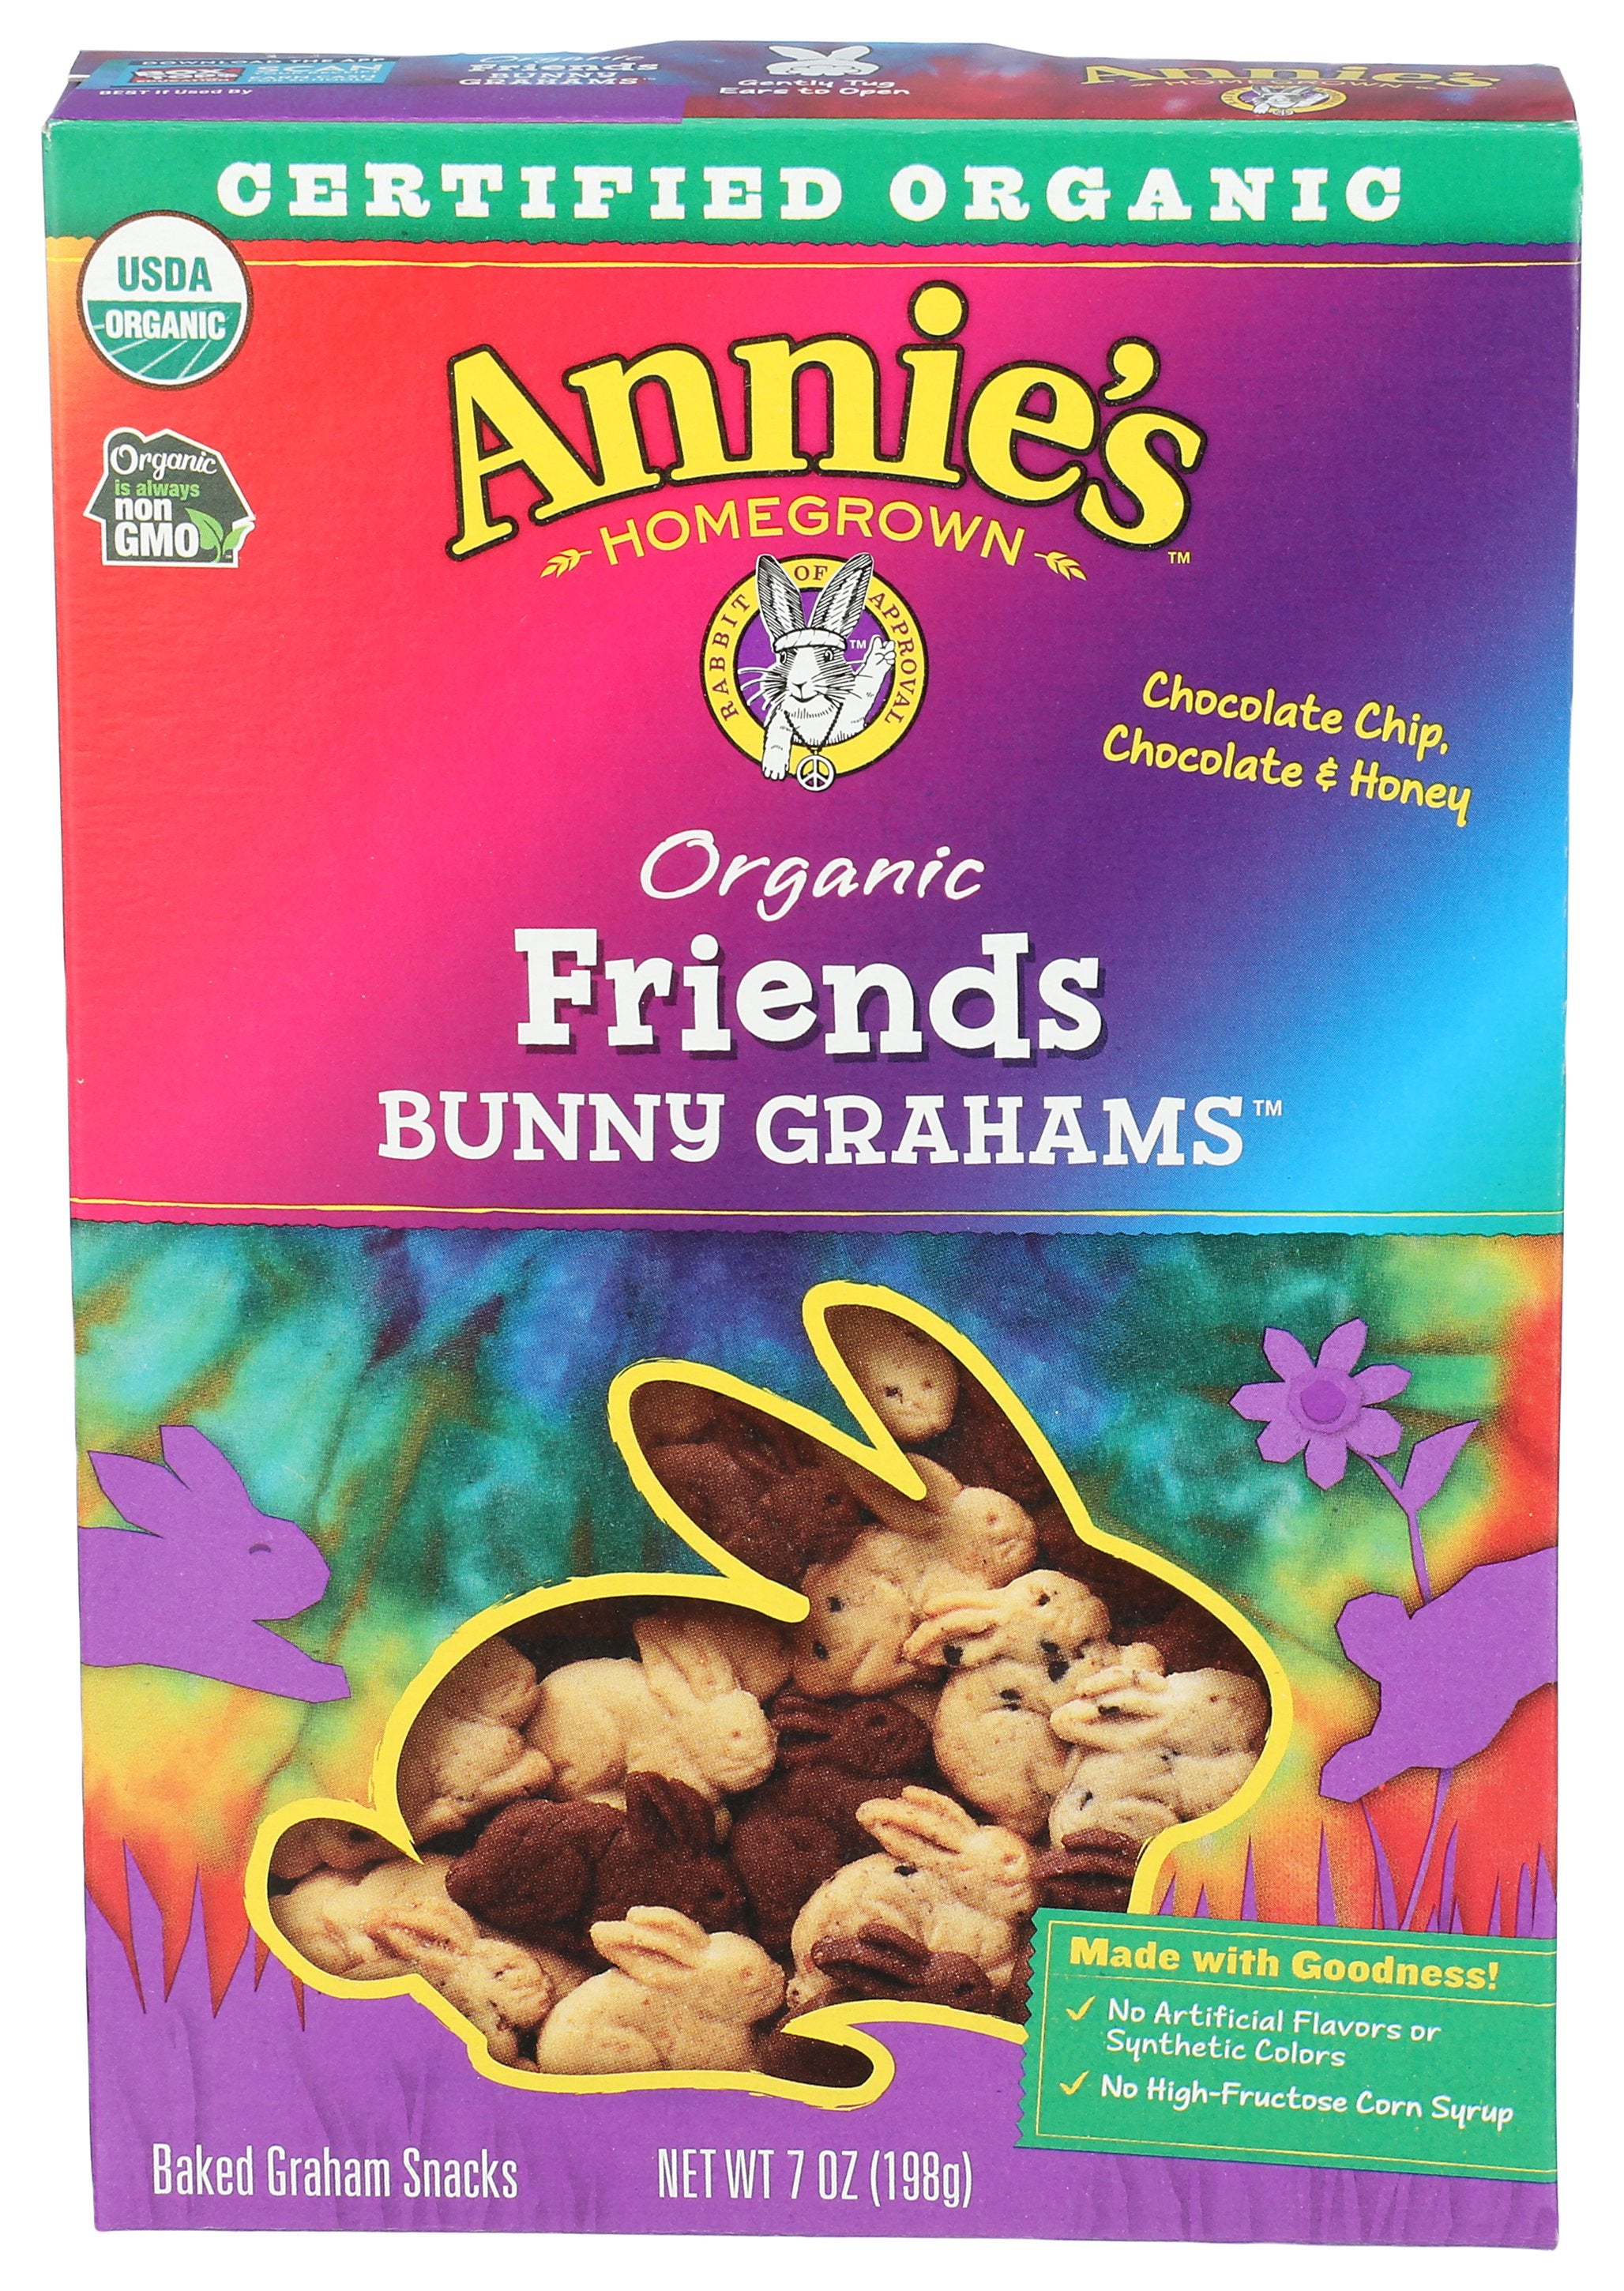 ANNIES HOMEGROWN COOKIE BUNNY GRAHAM FRIEND - Case of 3